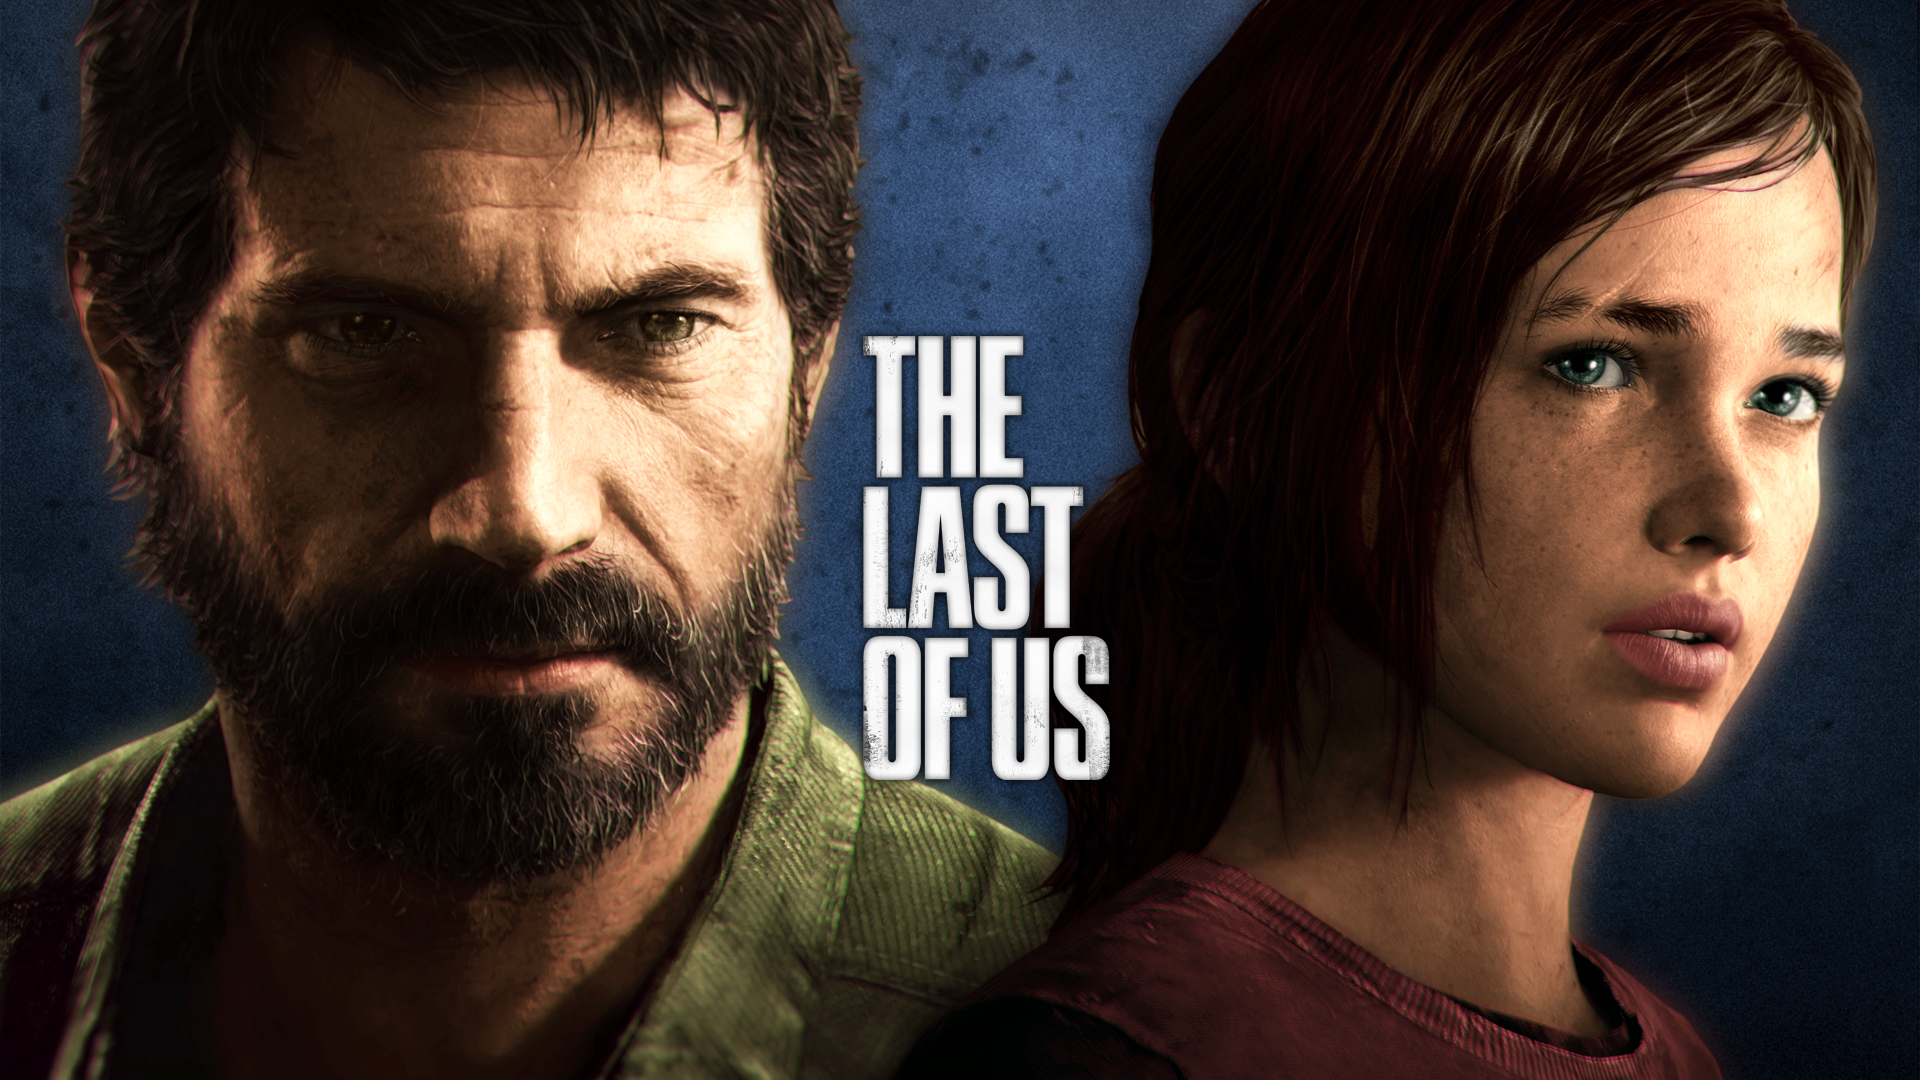 The Last of Us Wallpapers in HD